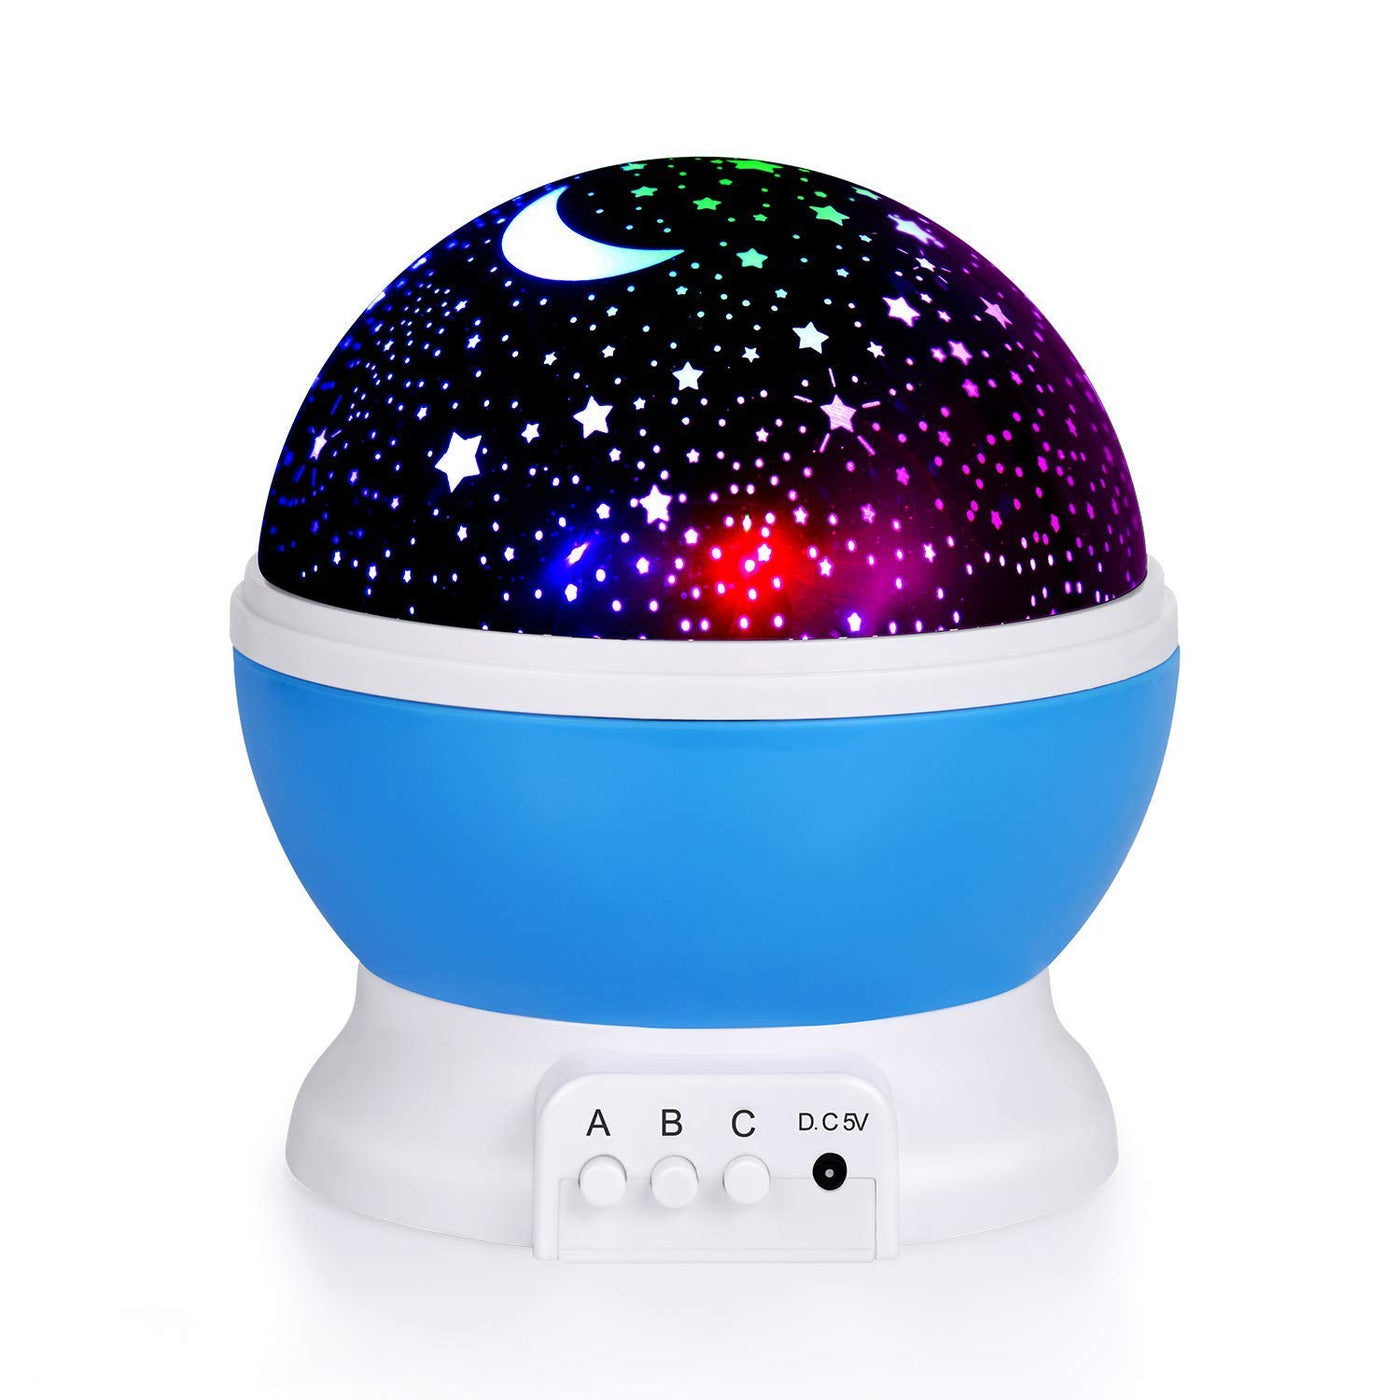 360 Degree Rotating Star Projector Lights Color Changing LED